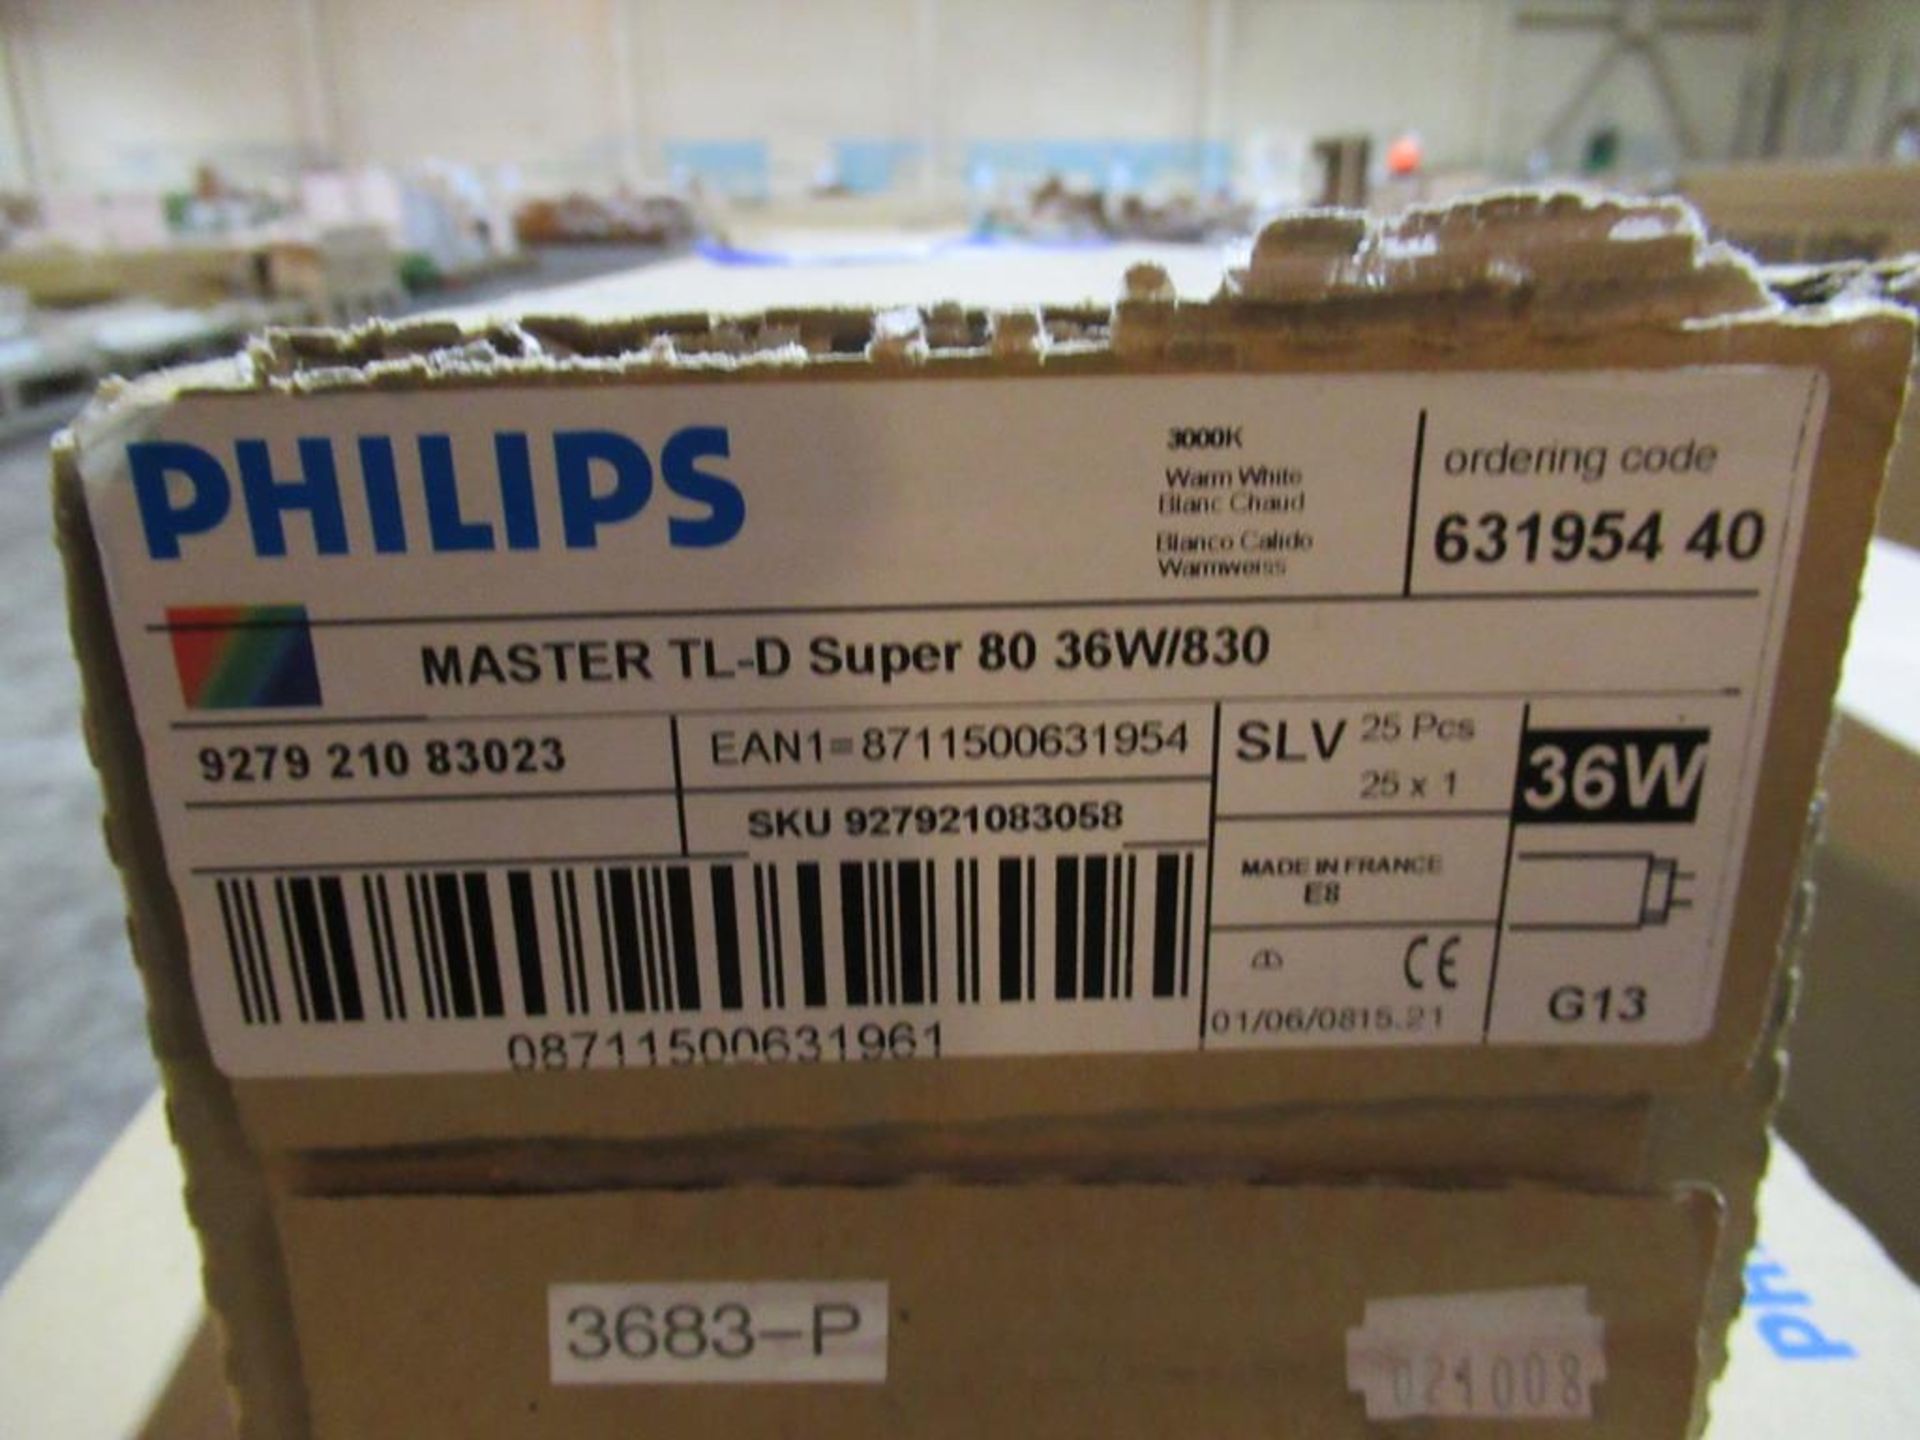 125 x Philips Master TL-D Super 58W G13 6500K OEM Trade Price £281 - Image 2 of 2